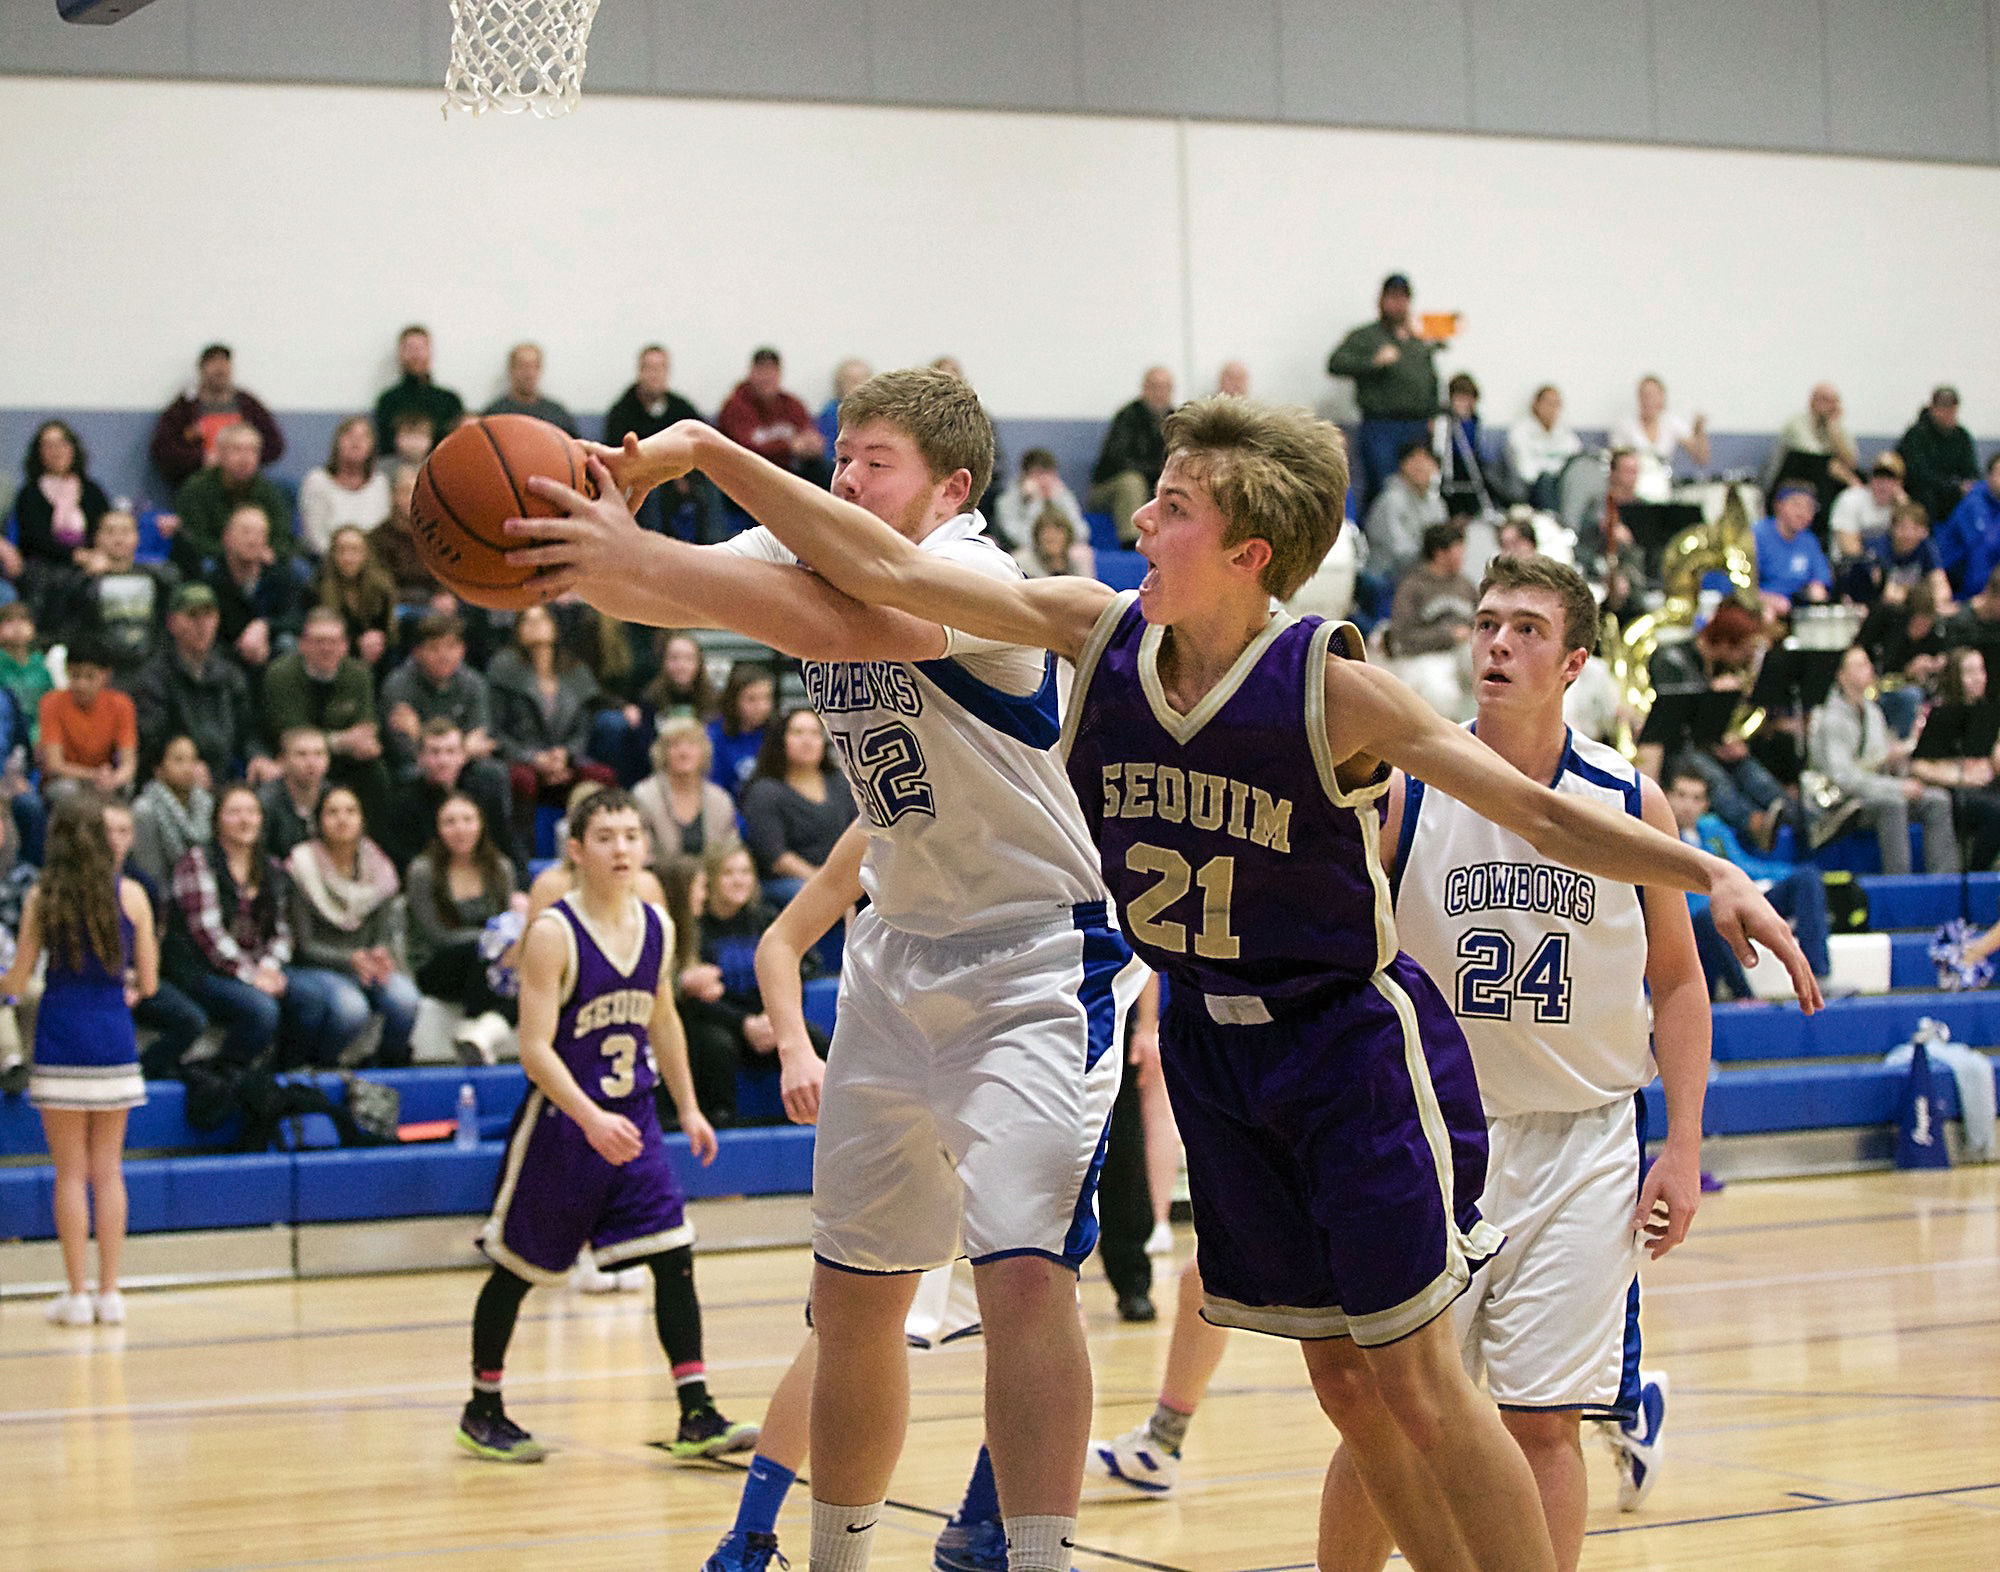 Sequim's Jackson Oliver (21) knocks the ball out of the hands of Chimacum's Lane Dotson and forces a turnover as Chimacum's Brendon Naylor (24) looks on. (Steve Mullensky/for Peninsula Daily News)